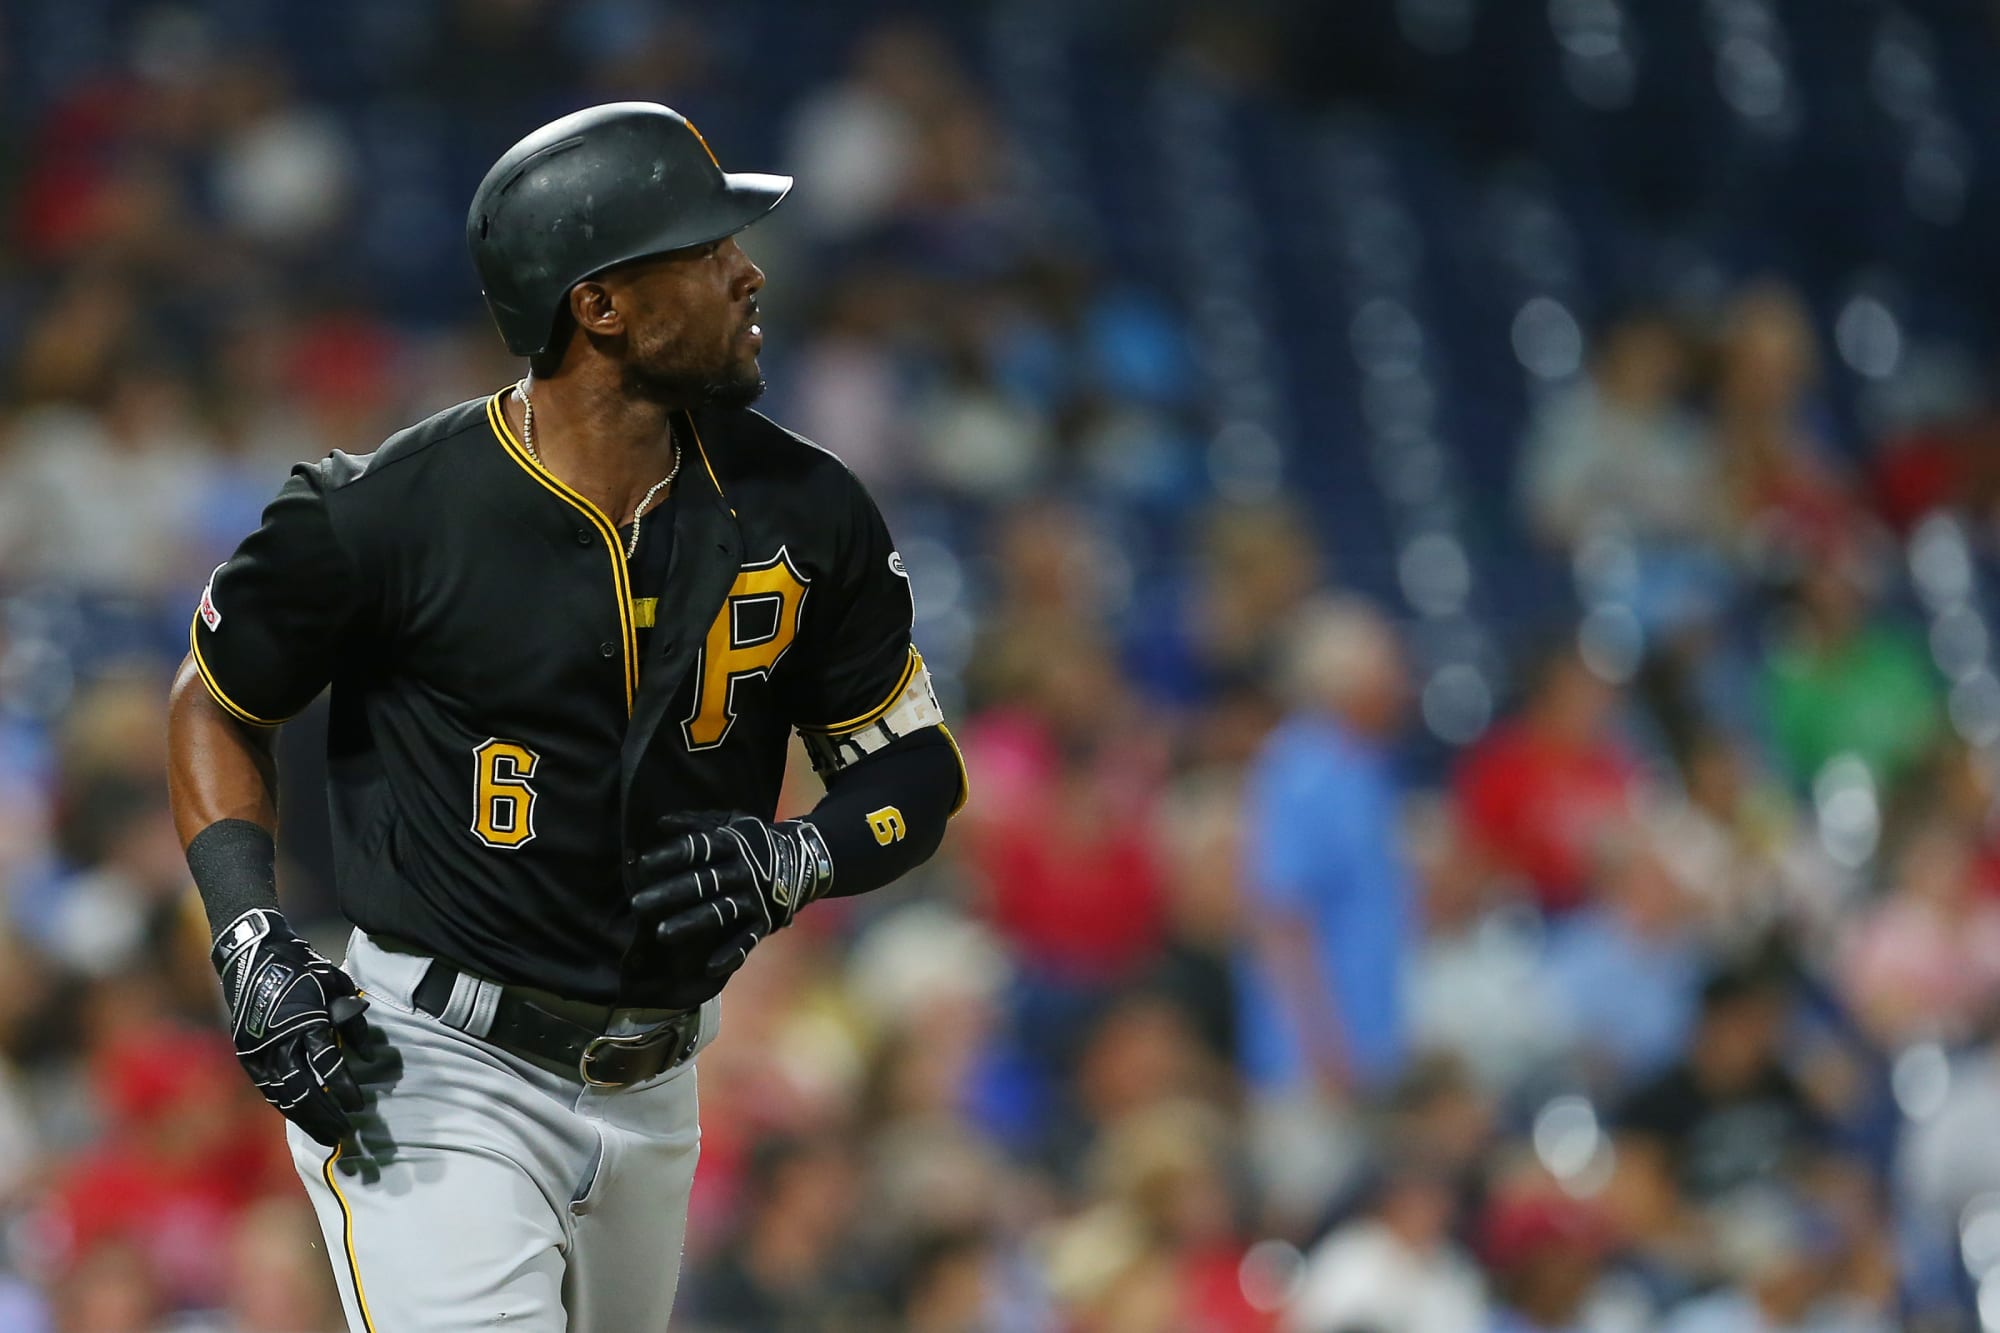 Pittsburgh Pirates: Reanalyzing the Starling Marte Trade